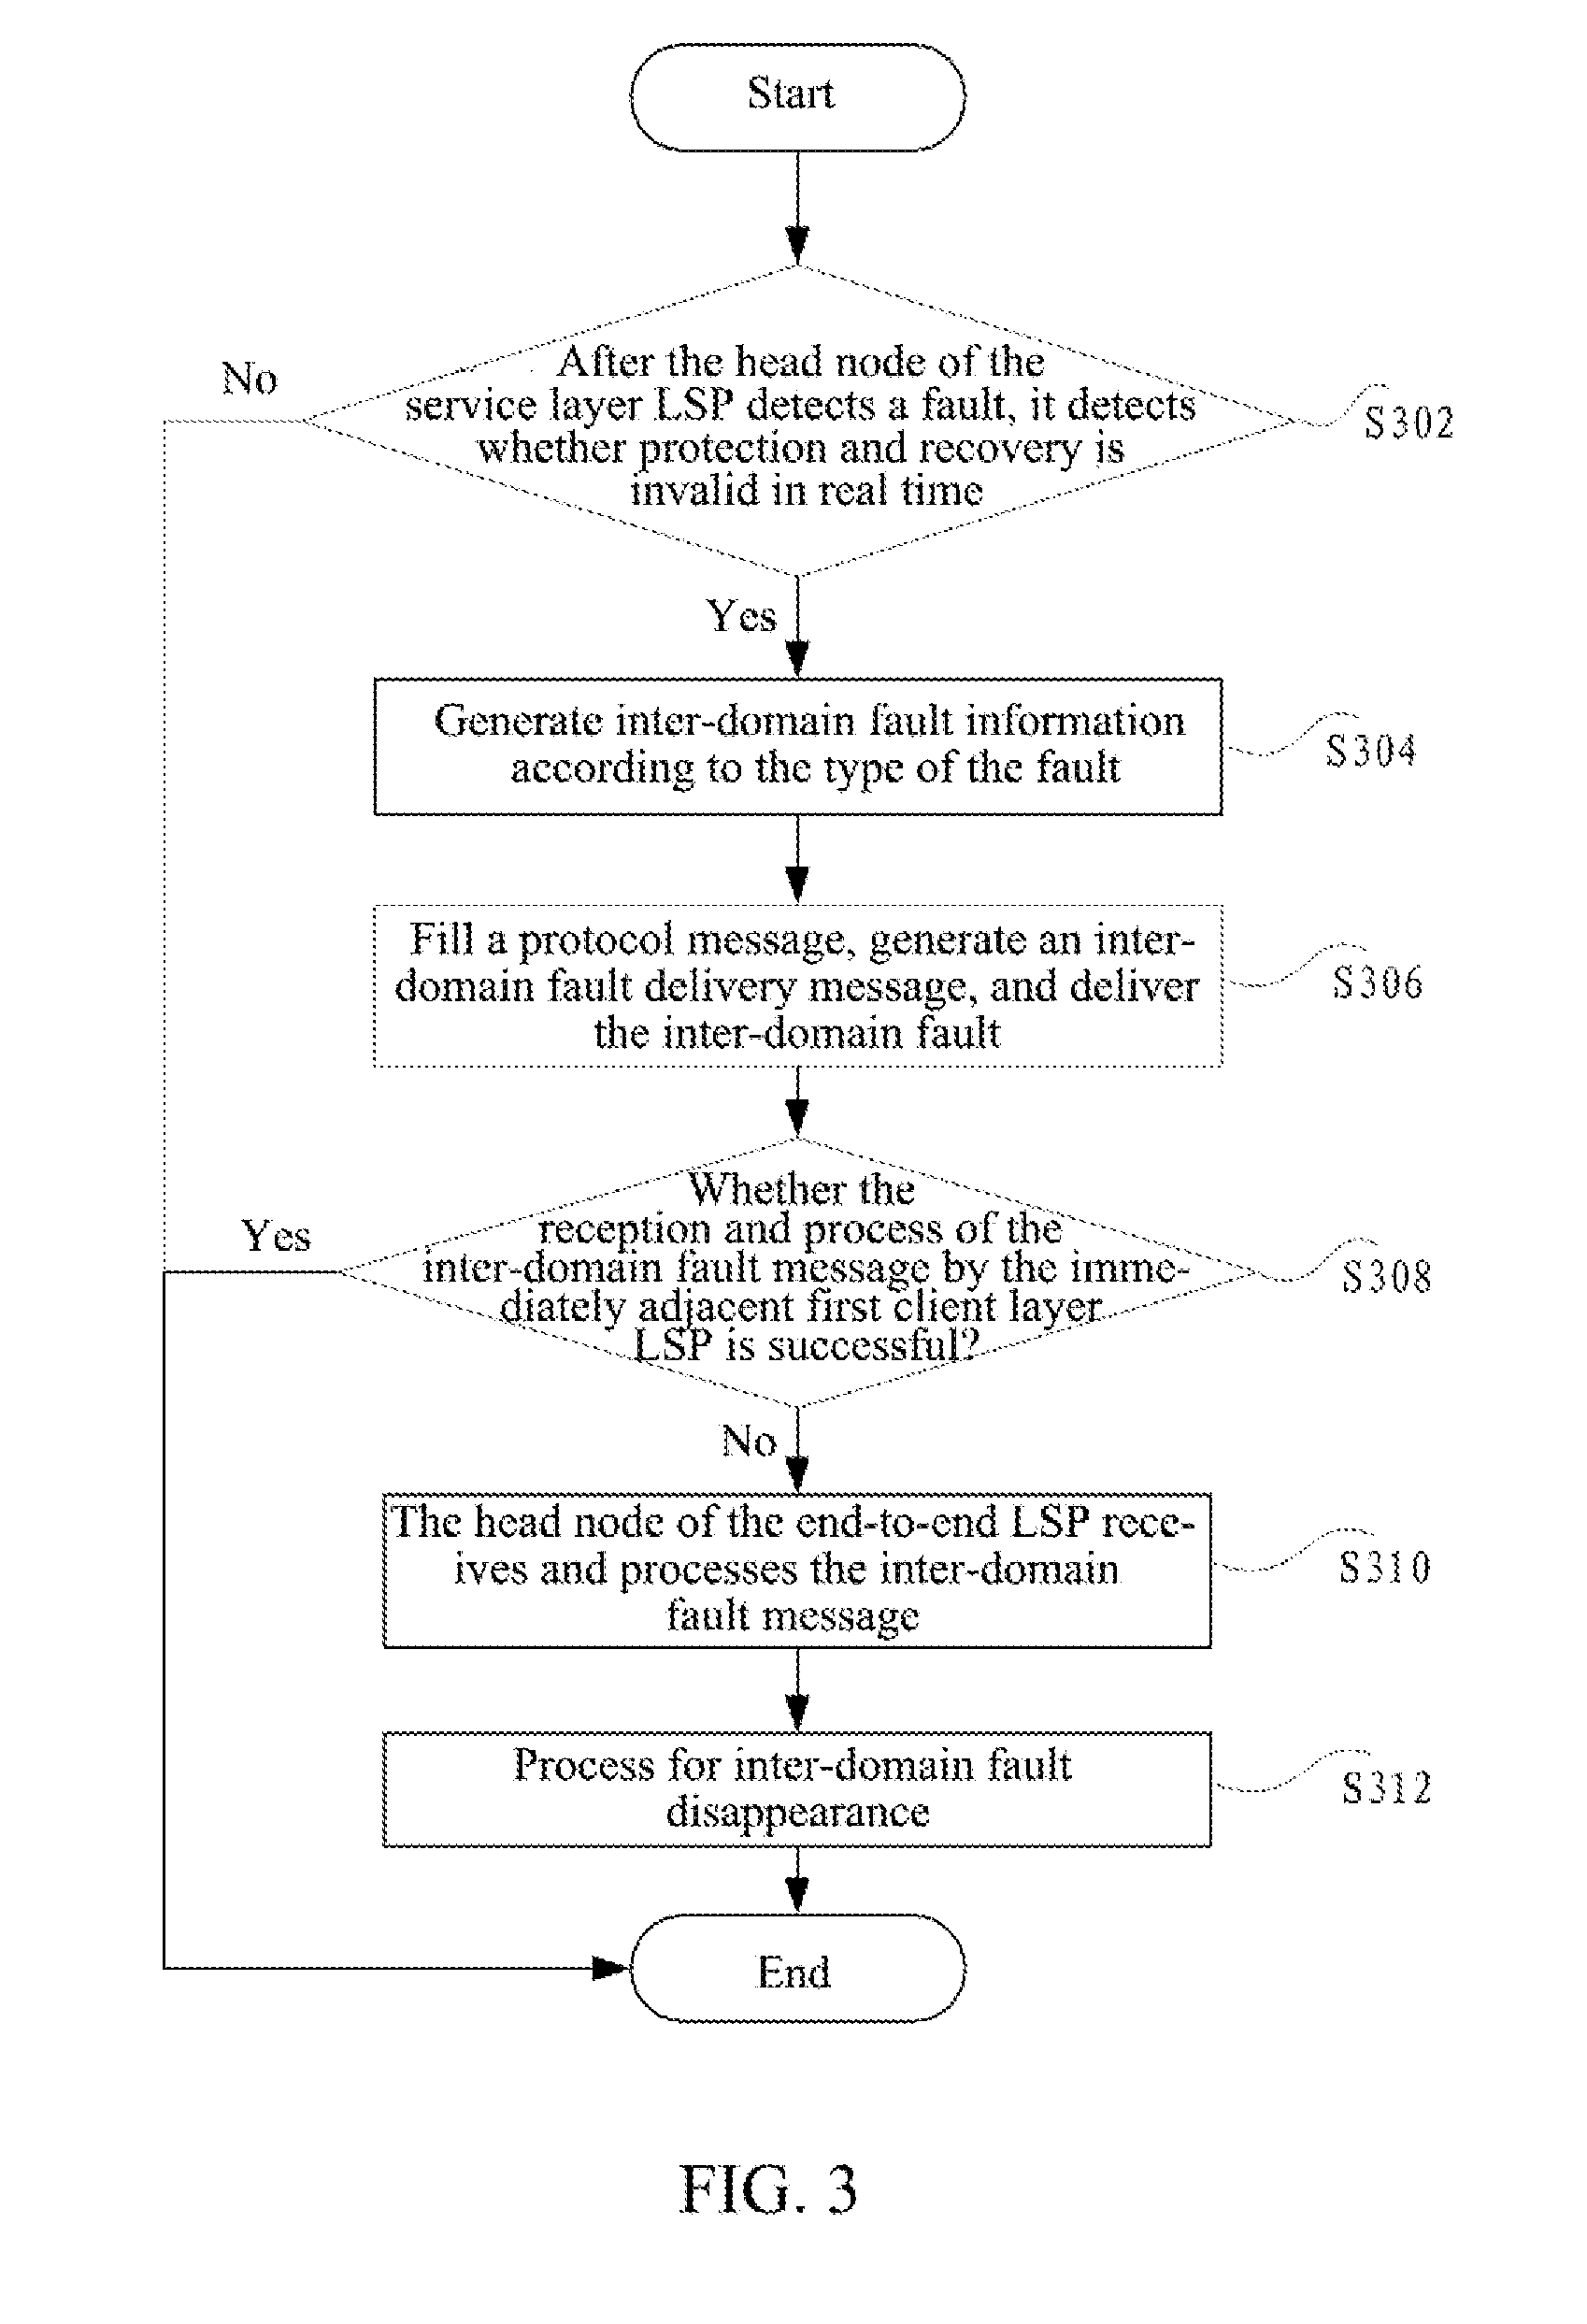 Method and Device for Sending Inter-Domain Fault Information